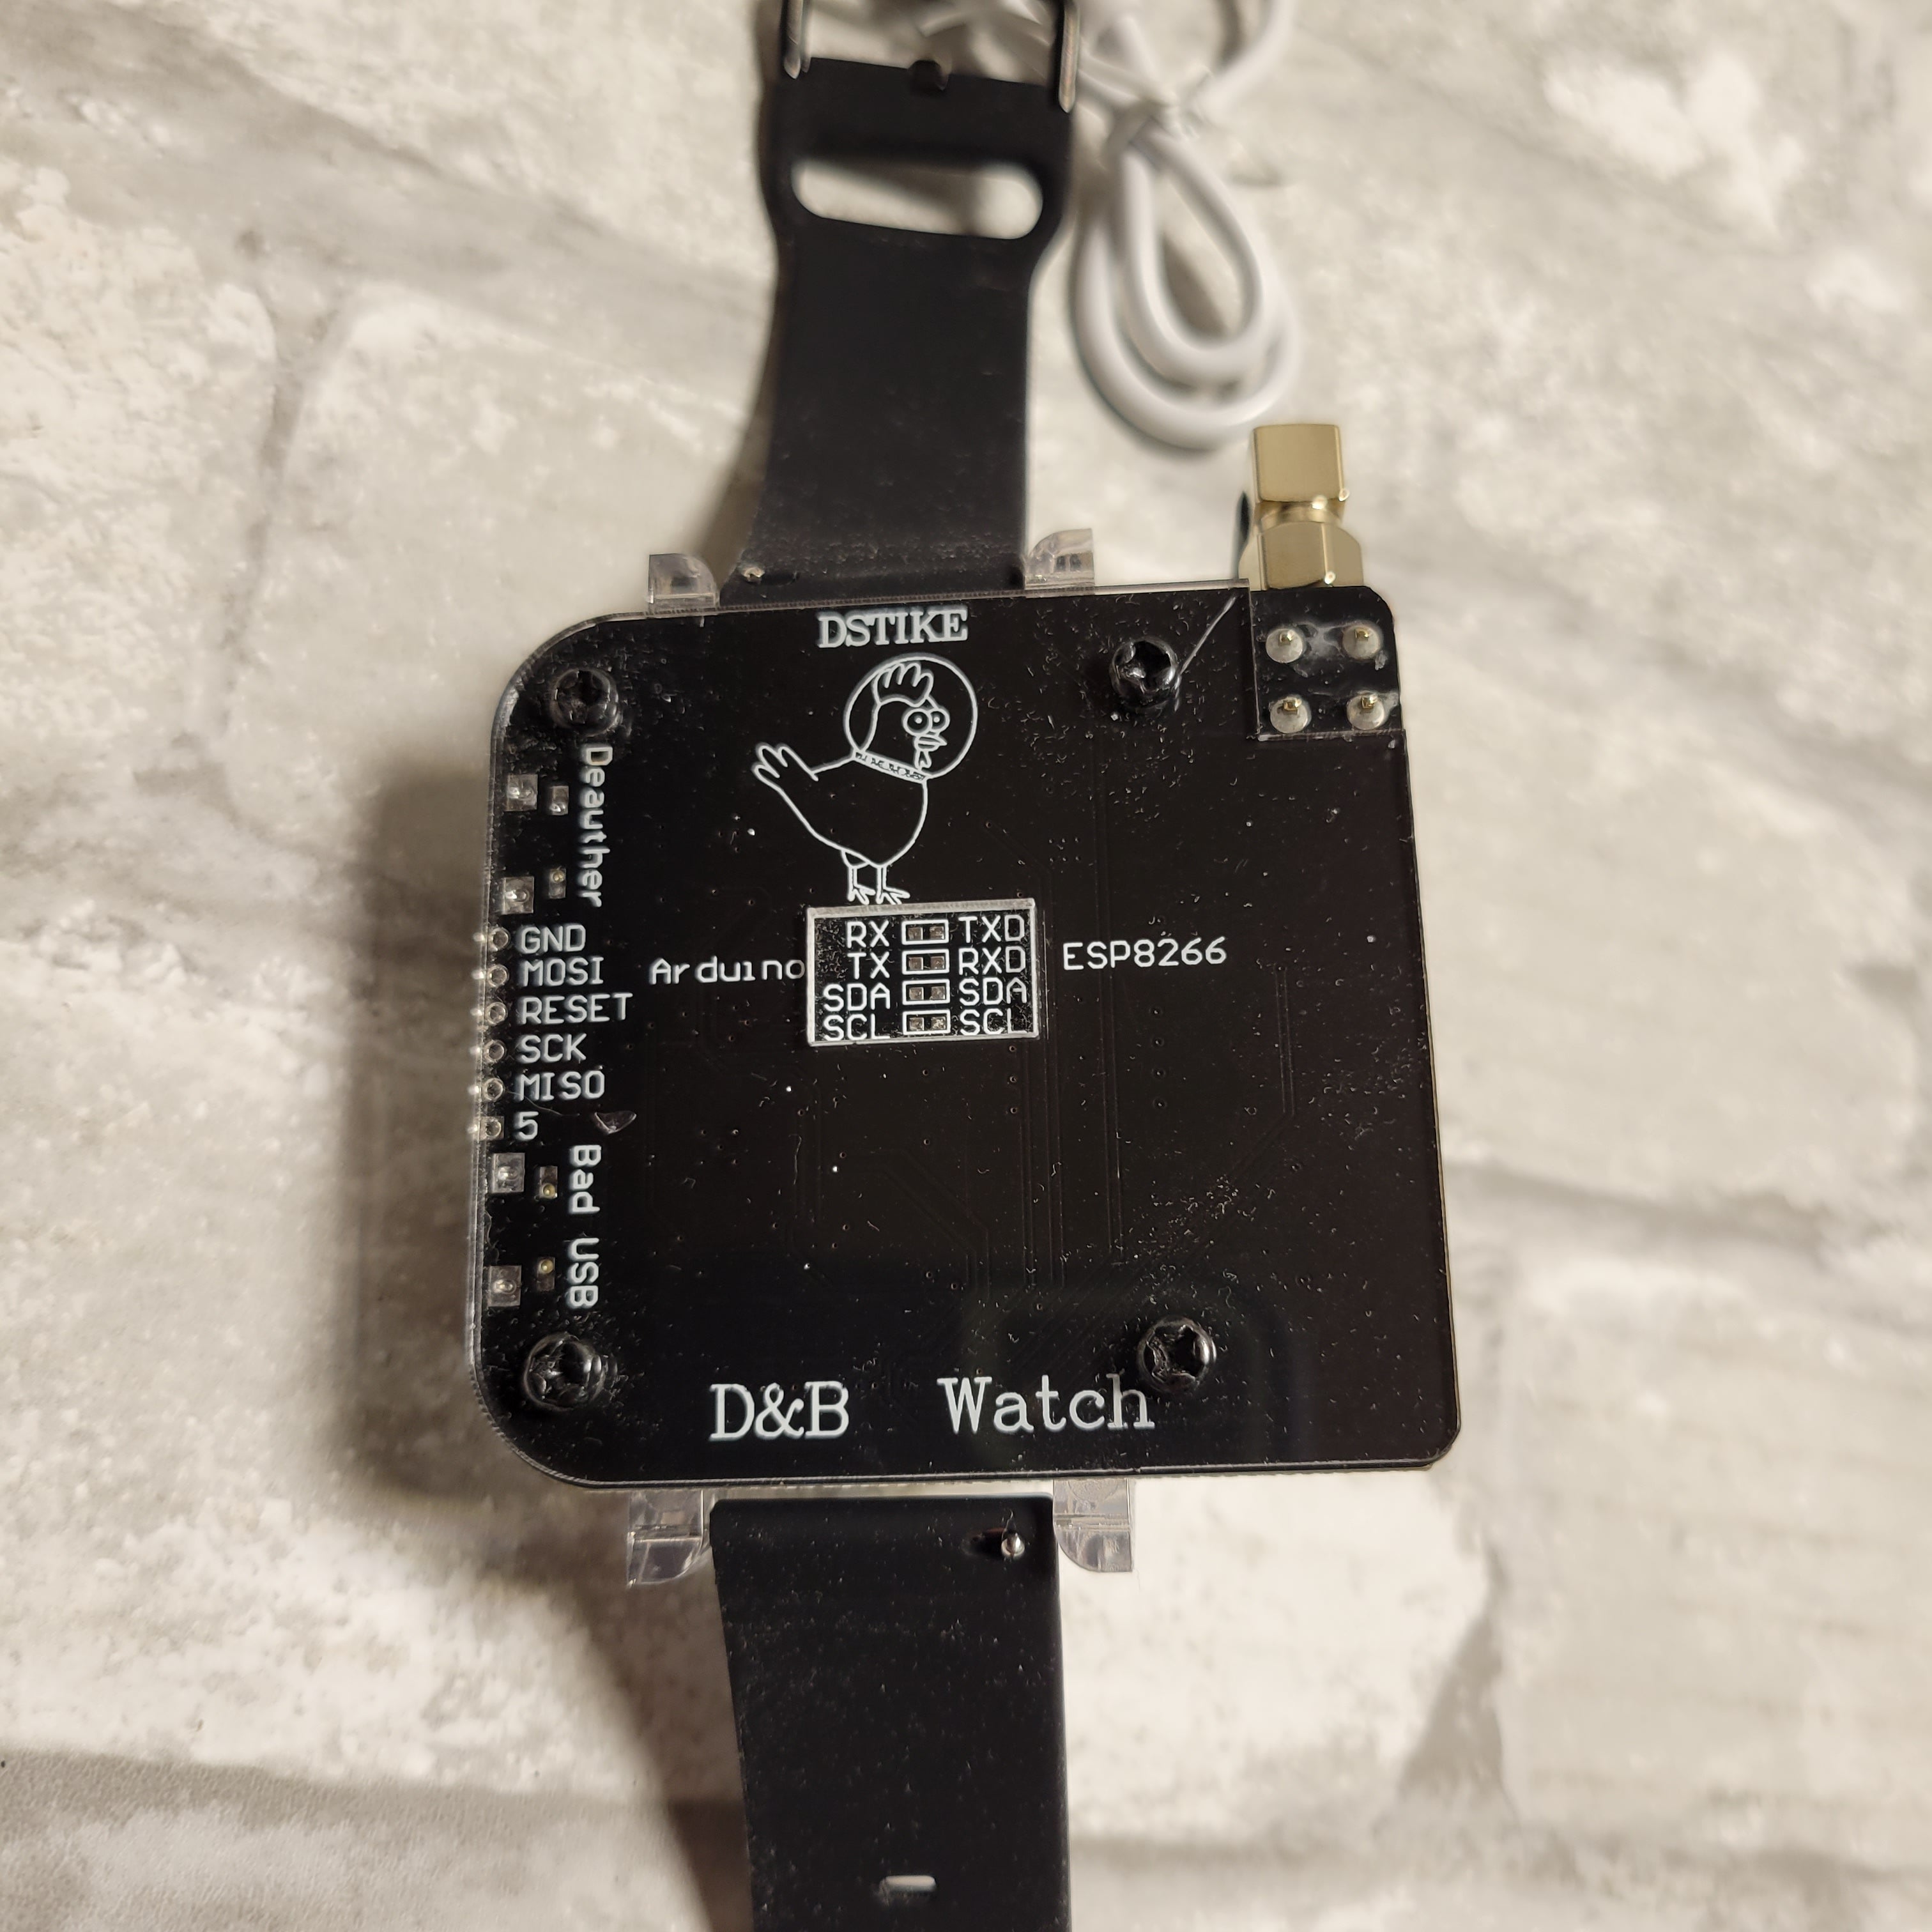 DSTIKE D&B Watch (V4) Deauther & Bad USB Watch Amazing Deauther Watch V4 (8038456951022)